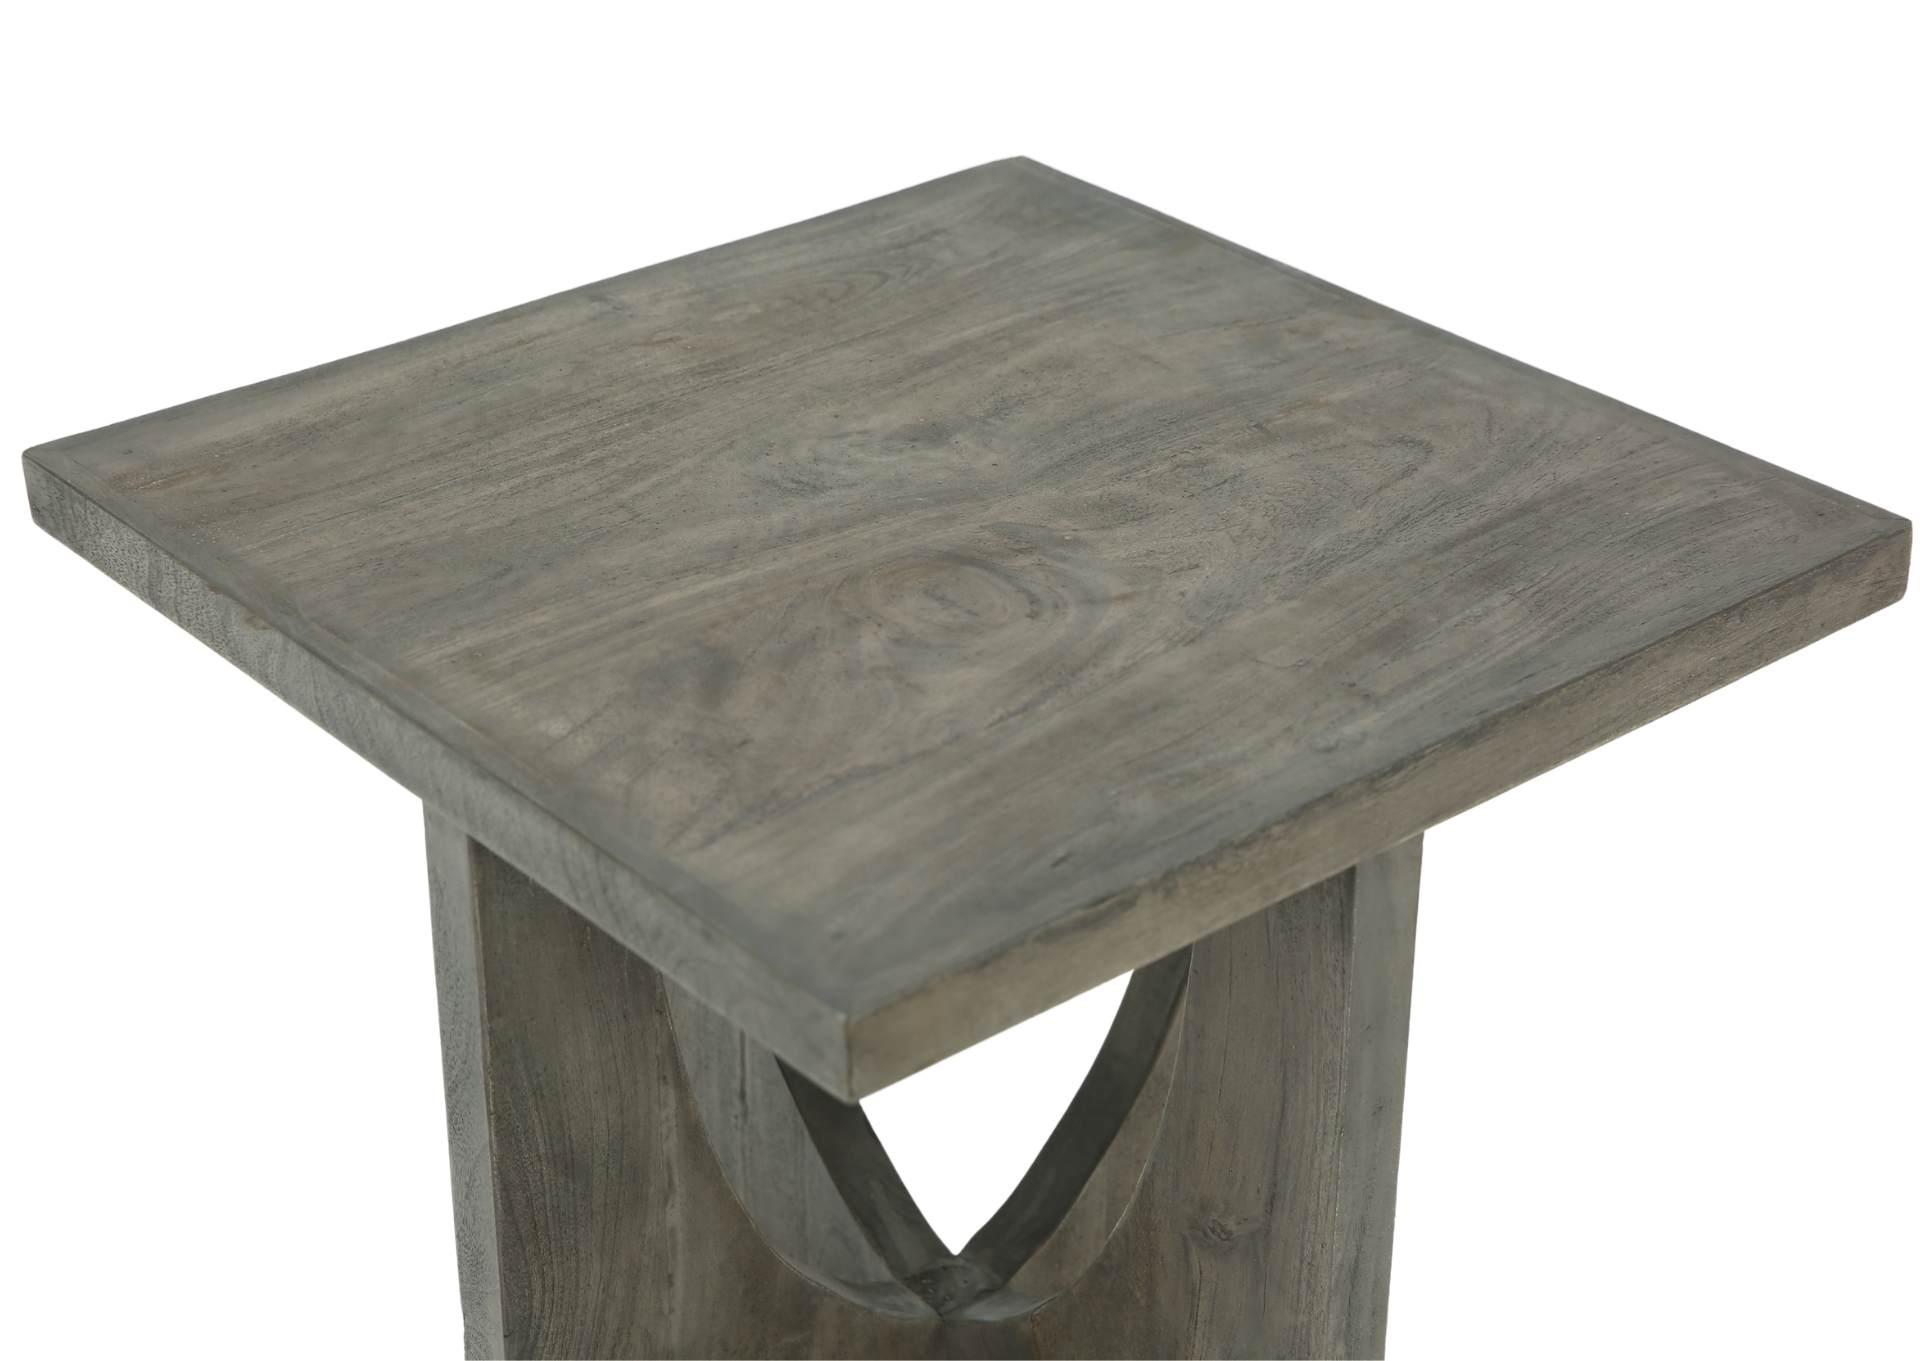 GLENRIDGE END TABLE,CRESTVIEW COLLECTION